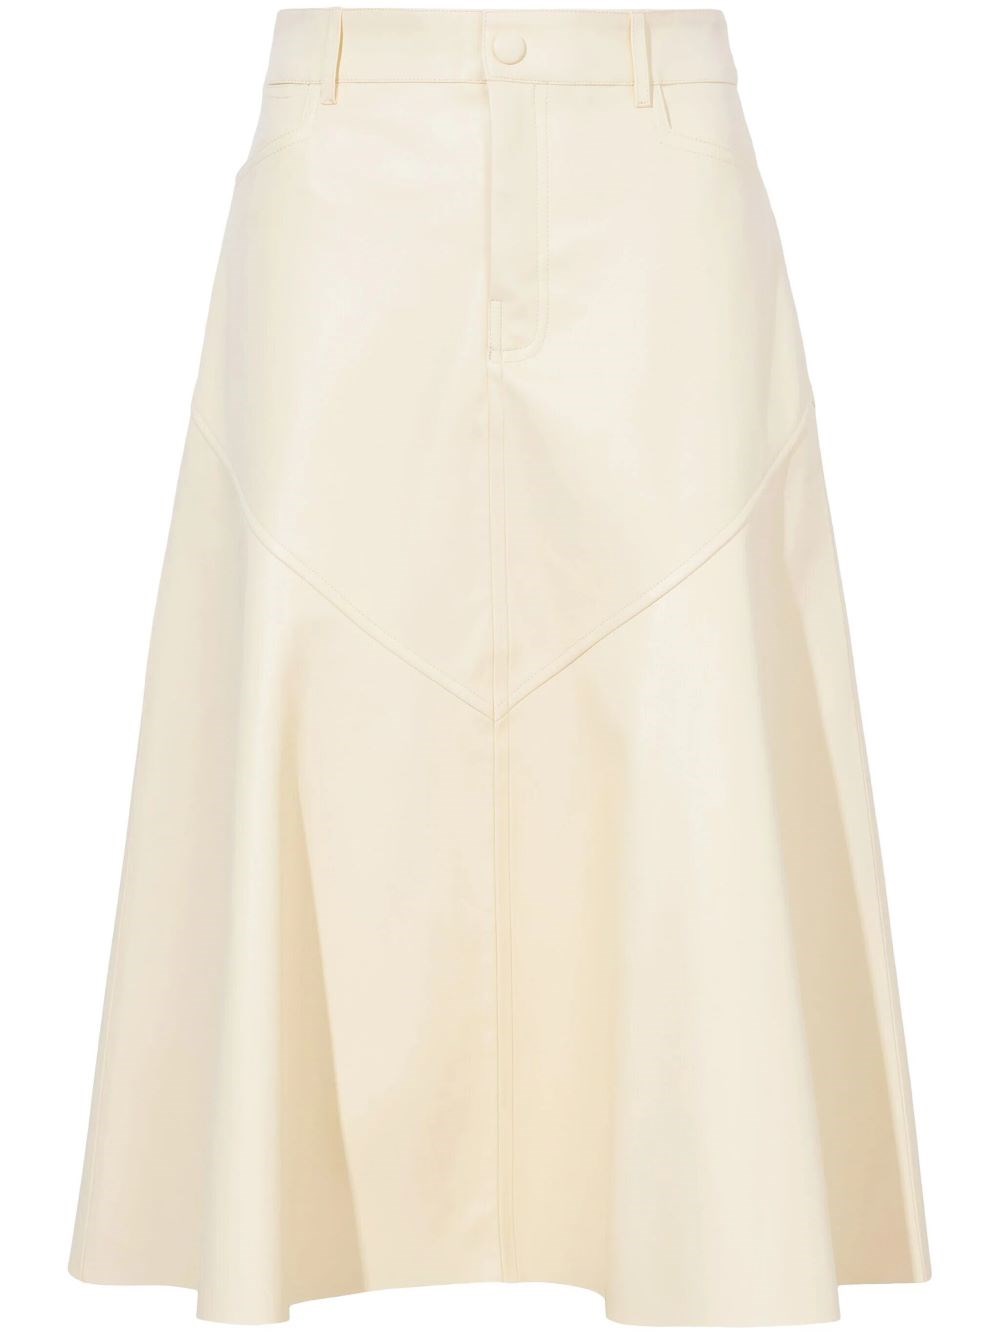 Proenza Schouler White Label Jesse Faux Leather Skirt In Parchment